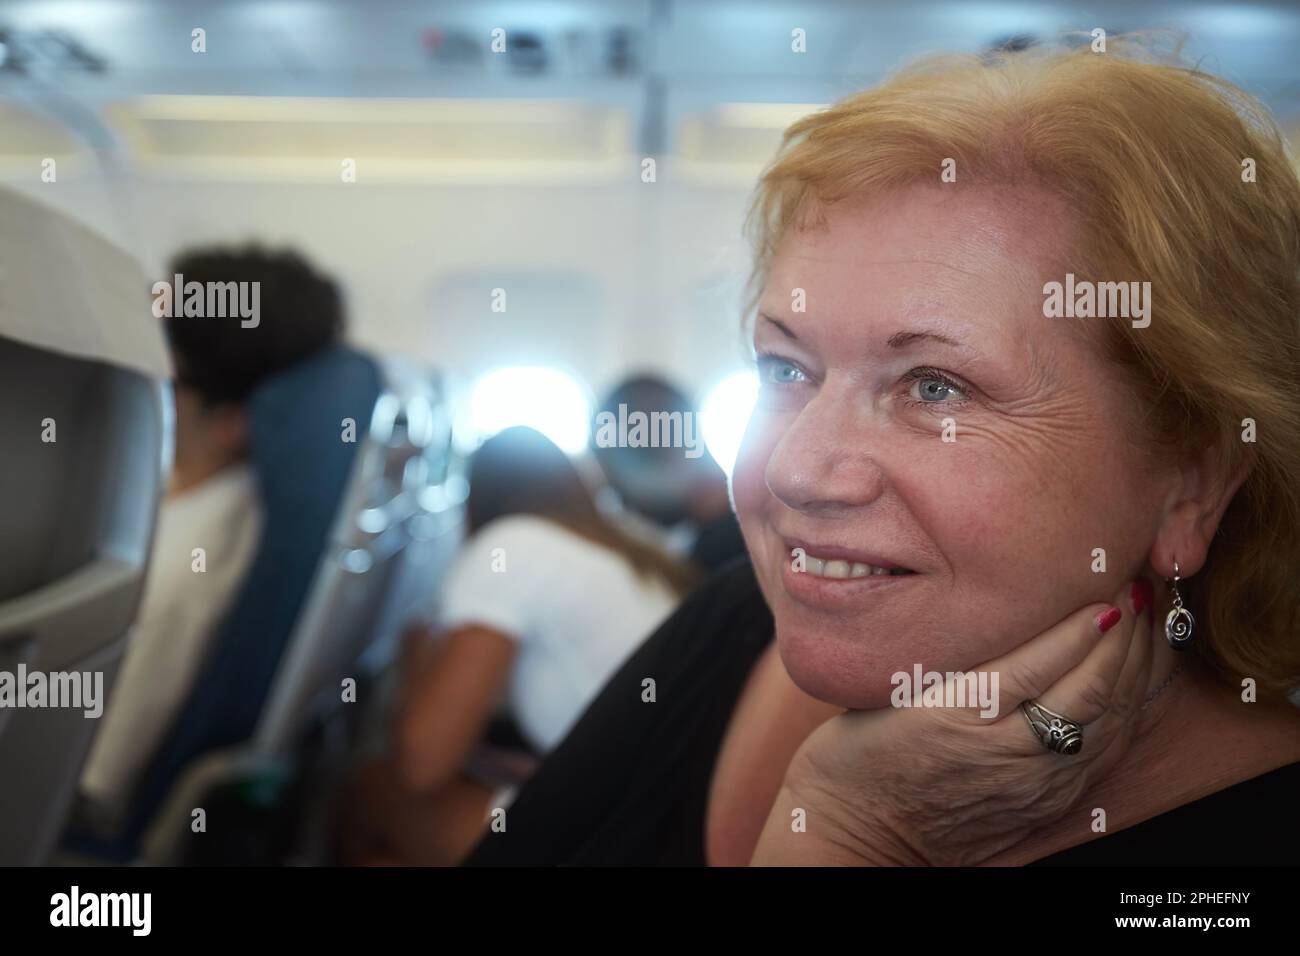 Portrait of senior woman with dreamy look while traveling by airplane. Passengers in airplane cabin during flight. Stock Photo